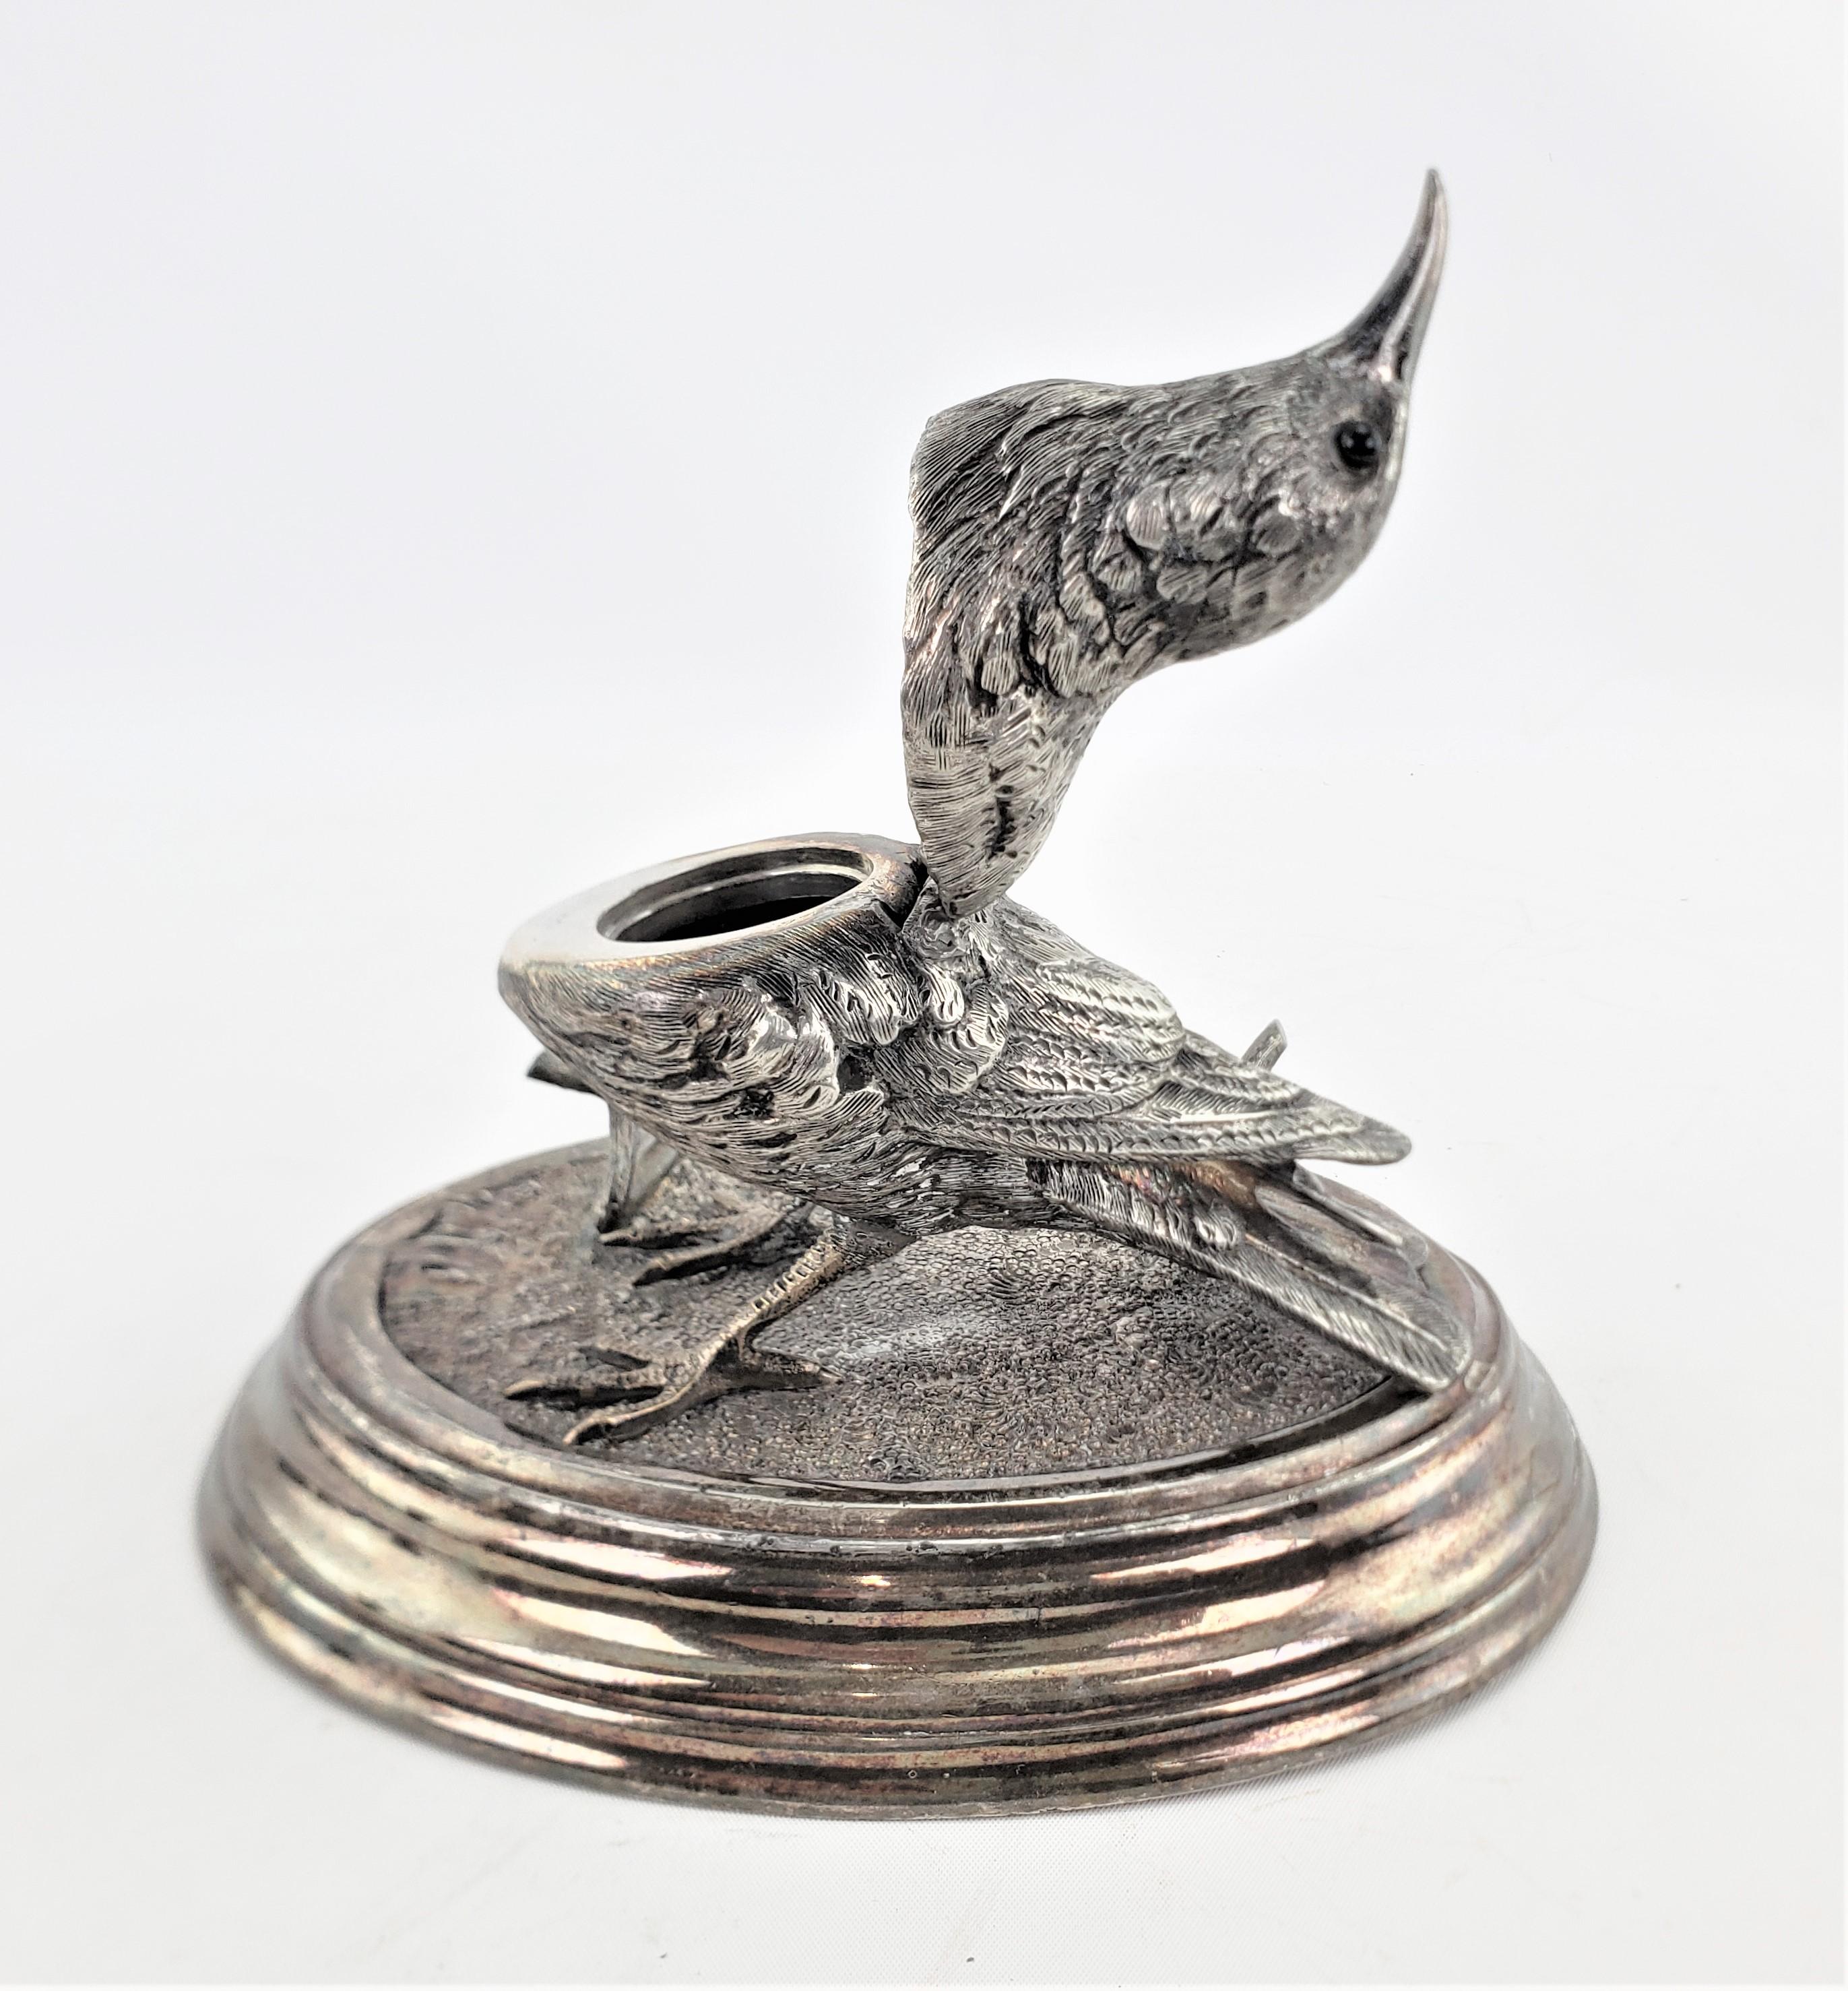 Antique Ornately Cast & Silver Plated Figural Bird Inkwell & Pen Holder or Rest 5